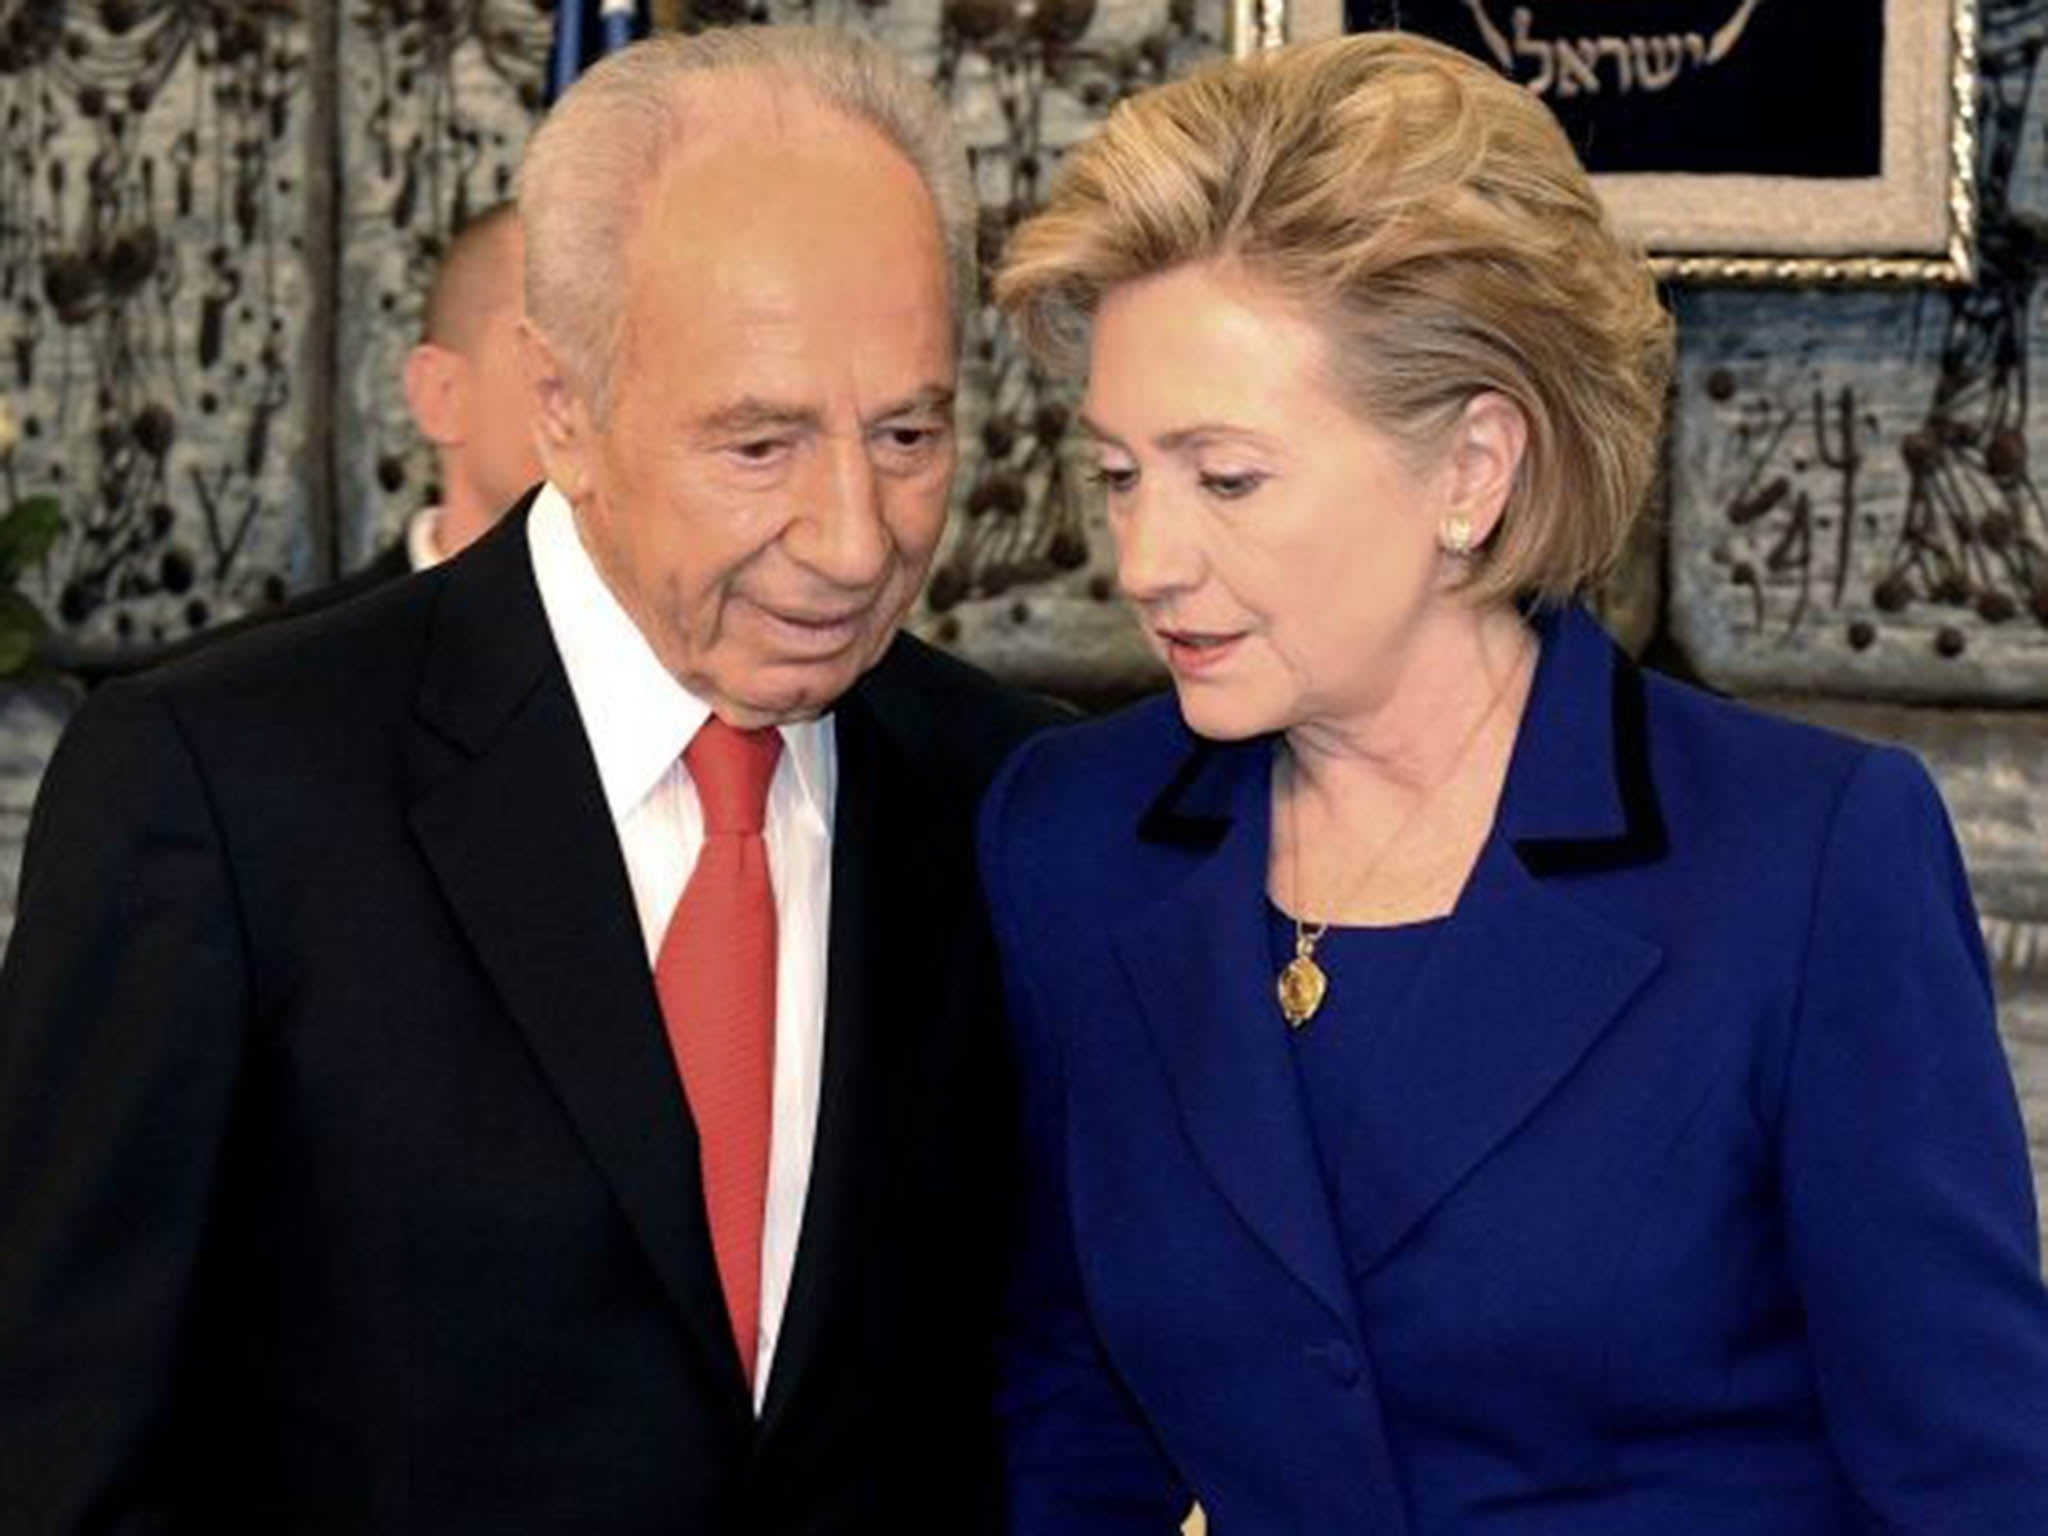 Former Israel President Shimon Peres, who died today, in a conference with then US Secretary of State Hilary Clinton in Israel in 2009